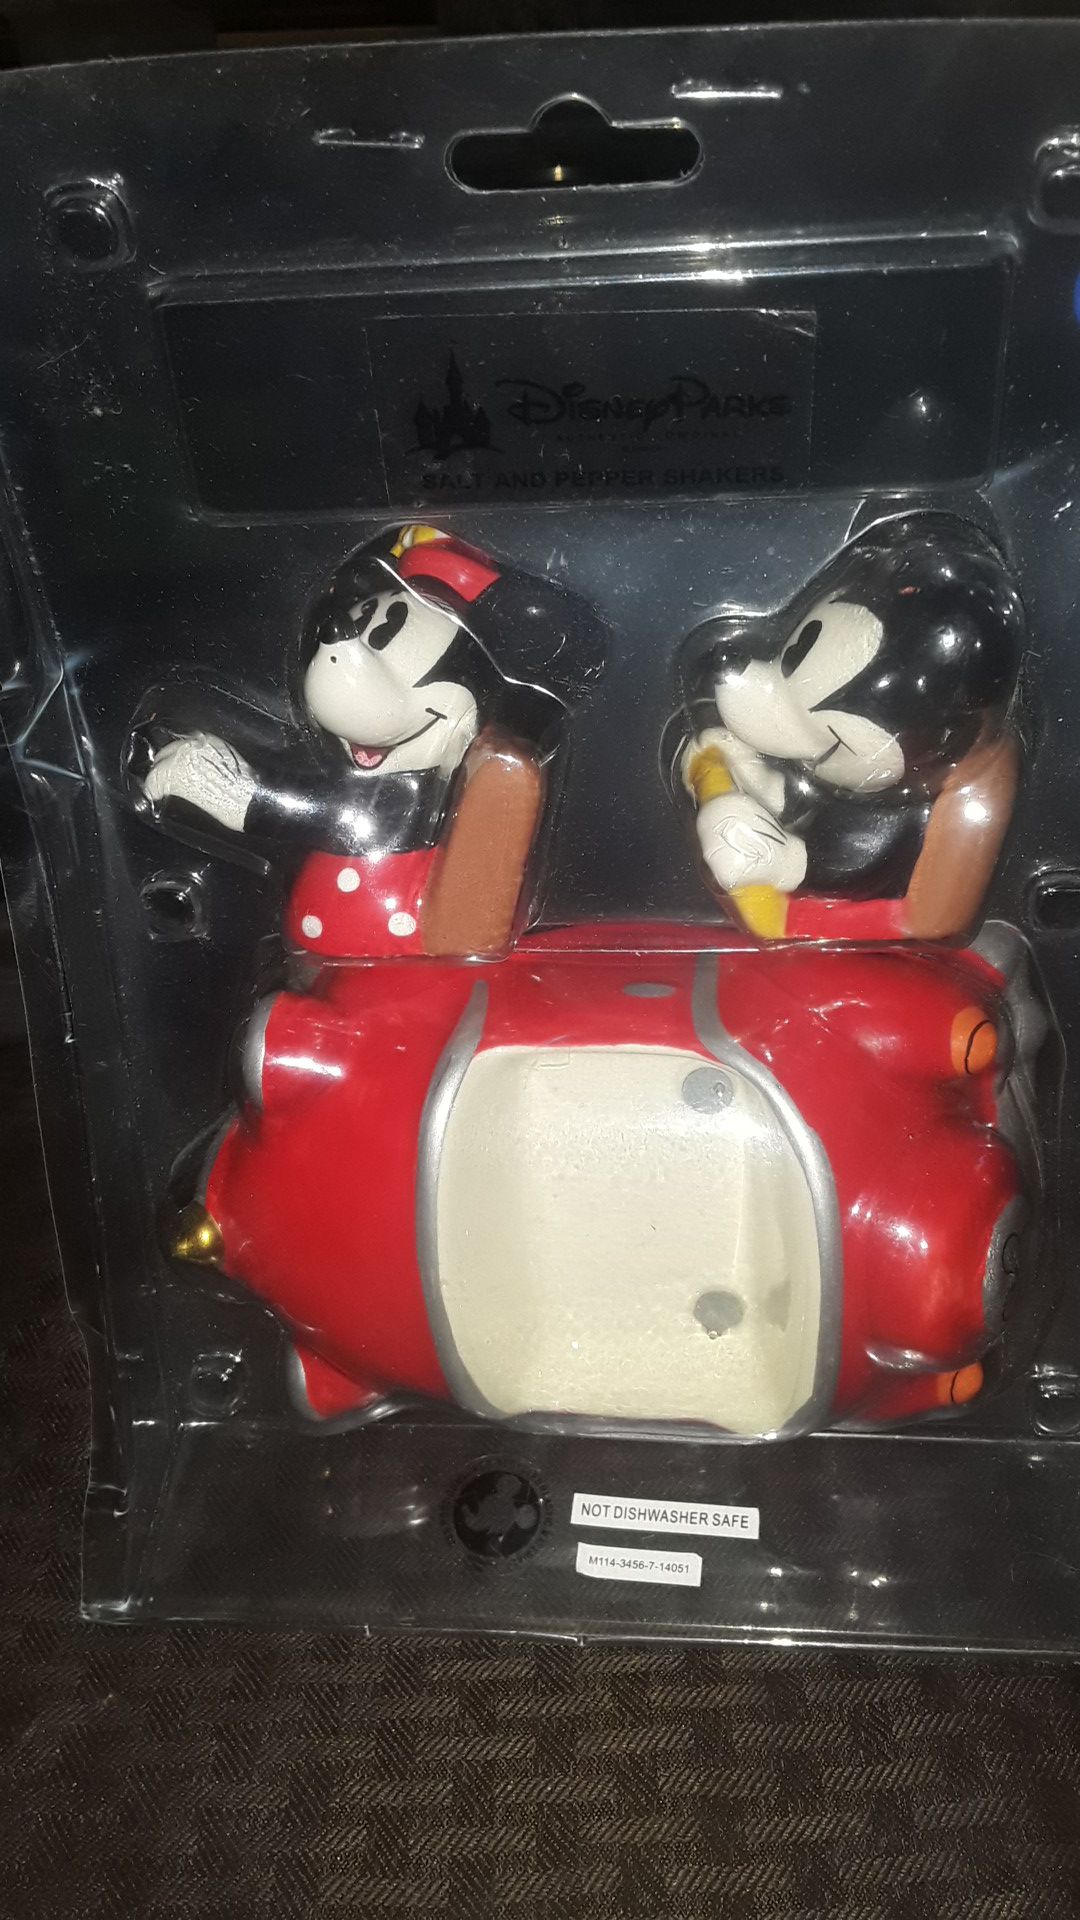 DISNEY PARK COLLECTABLE SALT & PEPPER SHAKERS MICKEY/ MINNIE MOUSE WITH CAR HOLDER NEW IN PACKAGE